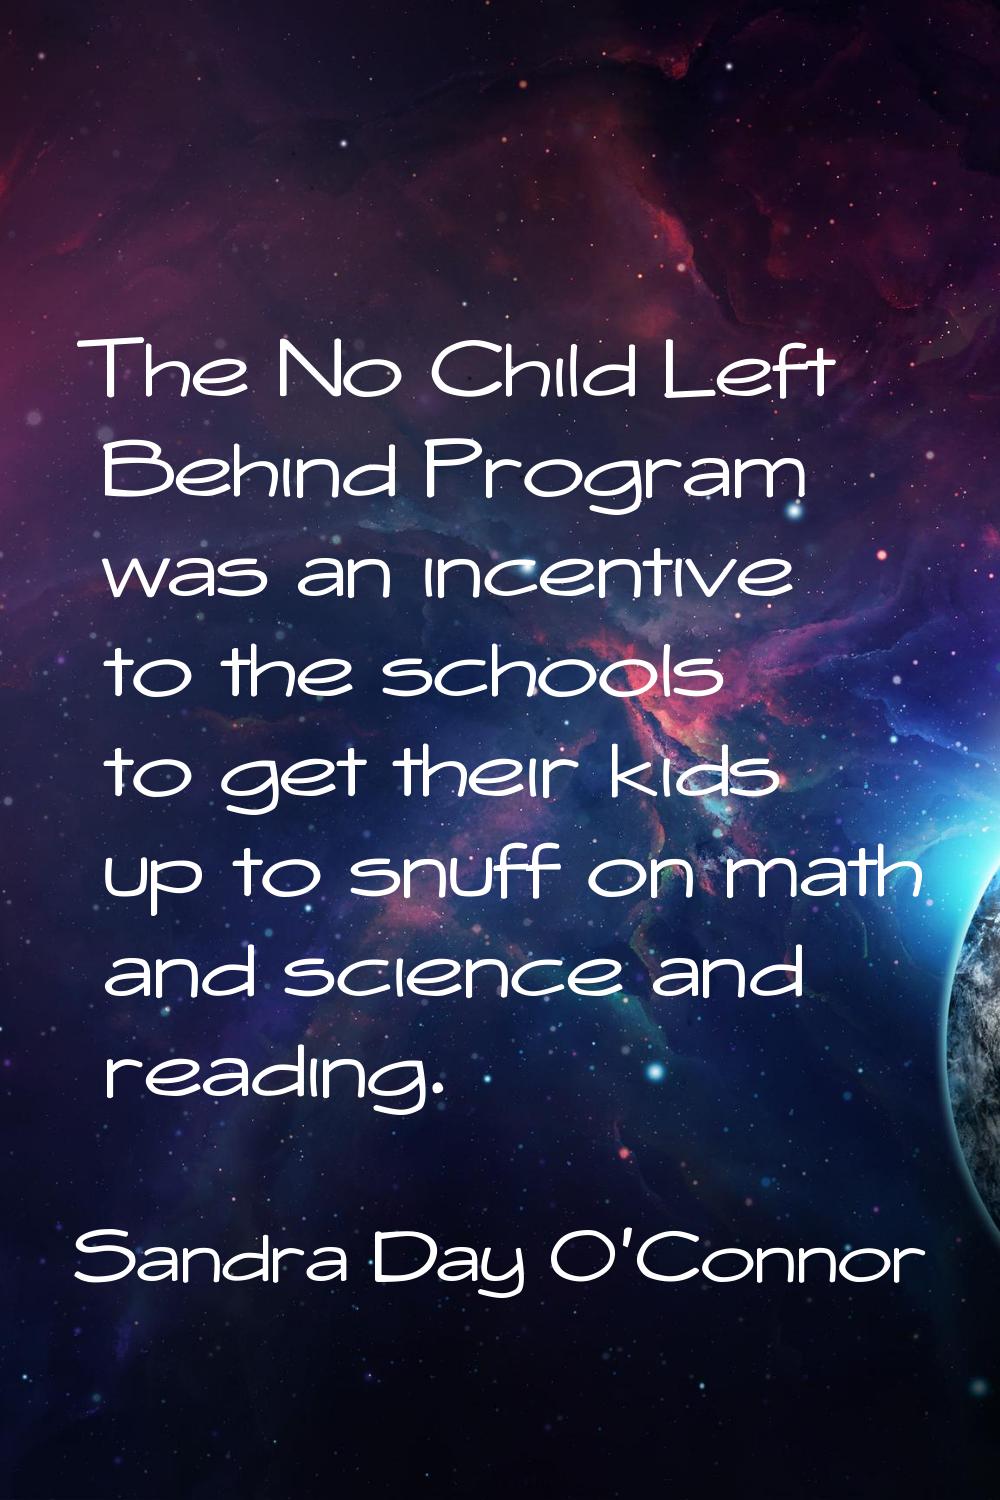 The No Child Left Behind Program was an incentive to the schools to get their kids up to snuff on m